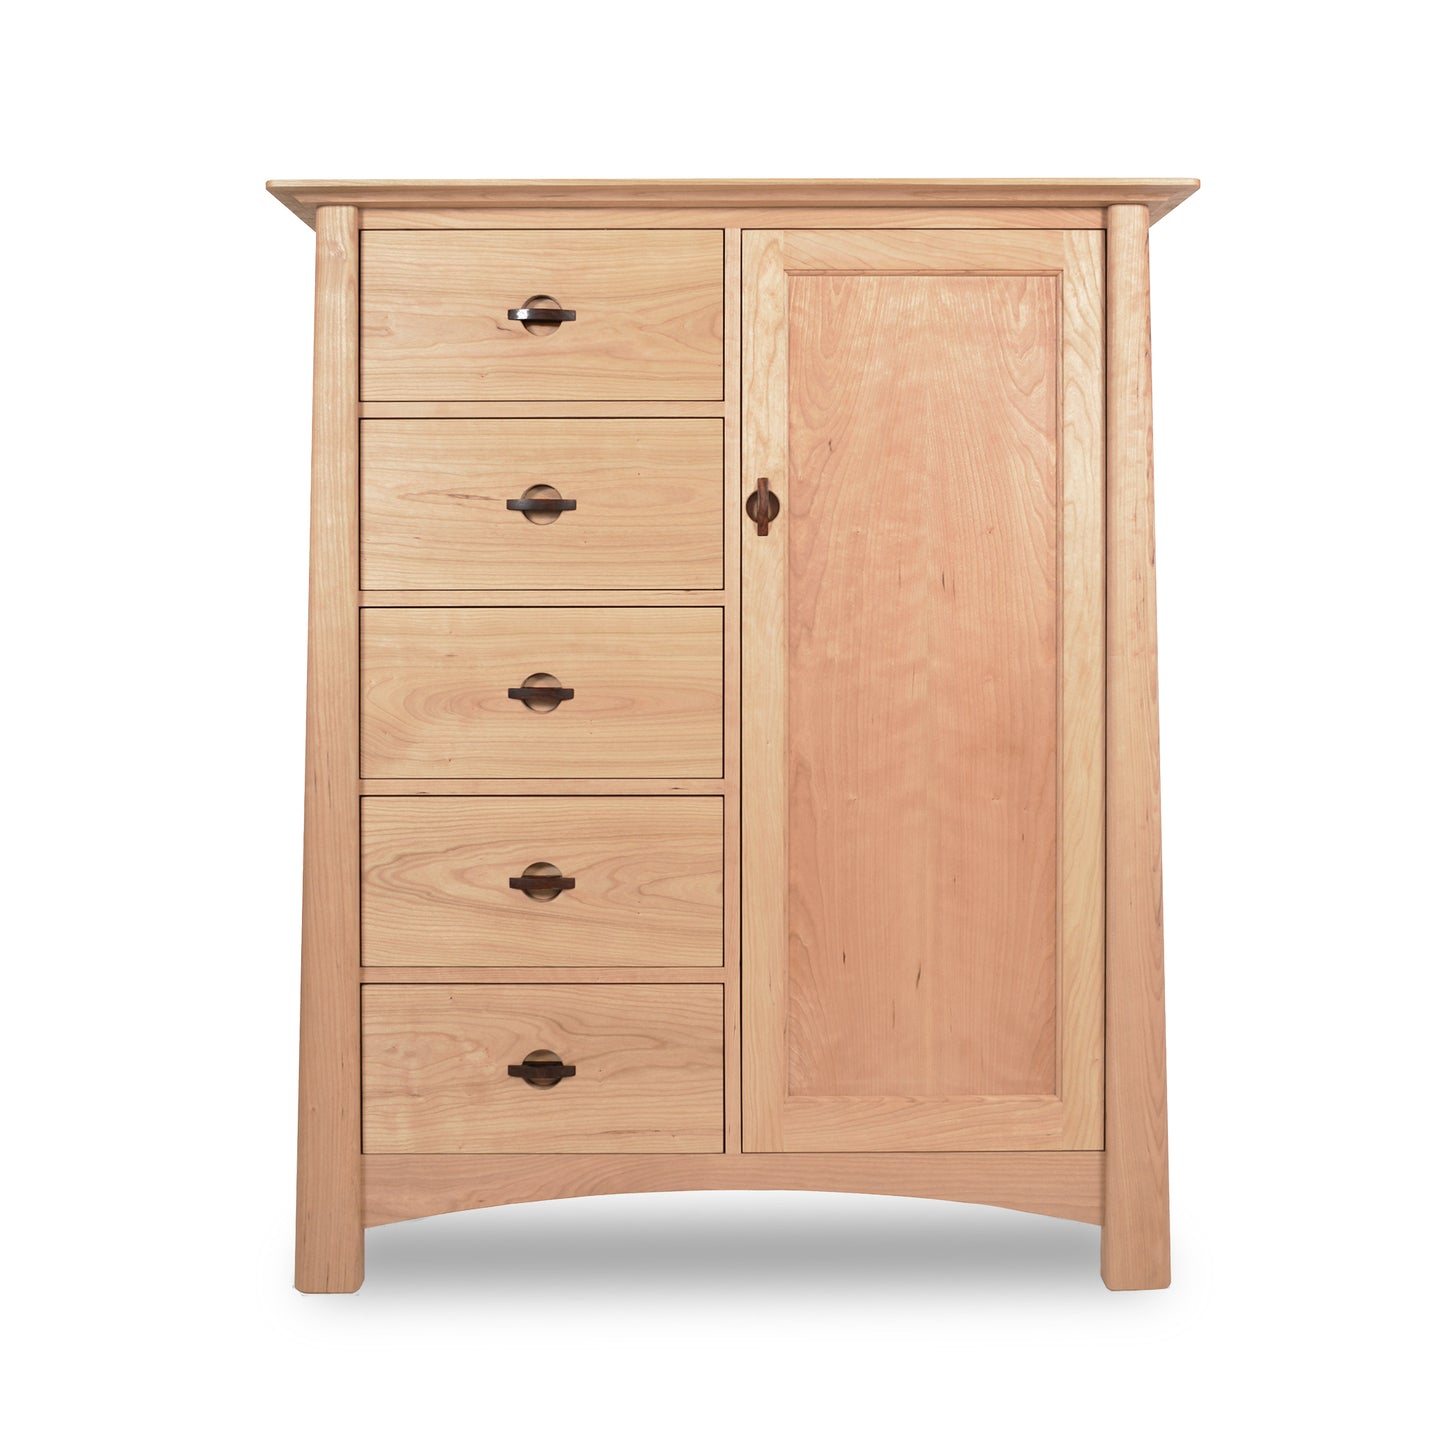 A Cherry Moon Sweater Chest by Maple Corner Woodworks with two drawers and two doors, featuring walnut pulls for an eco-friendly touch.